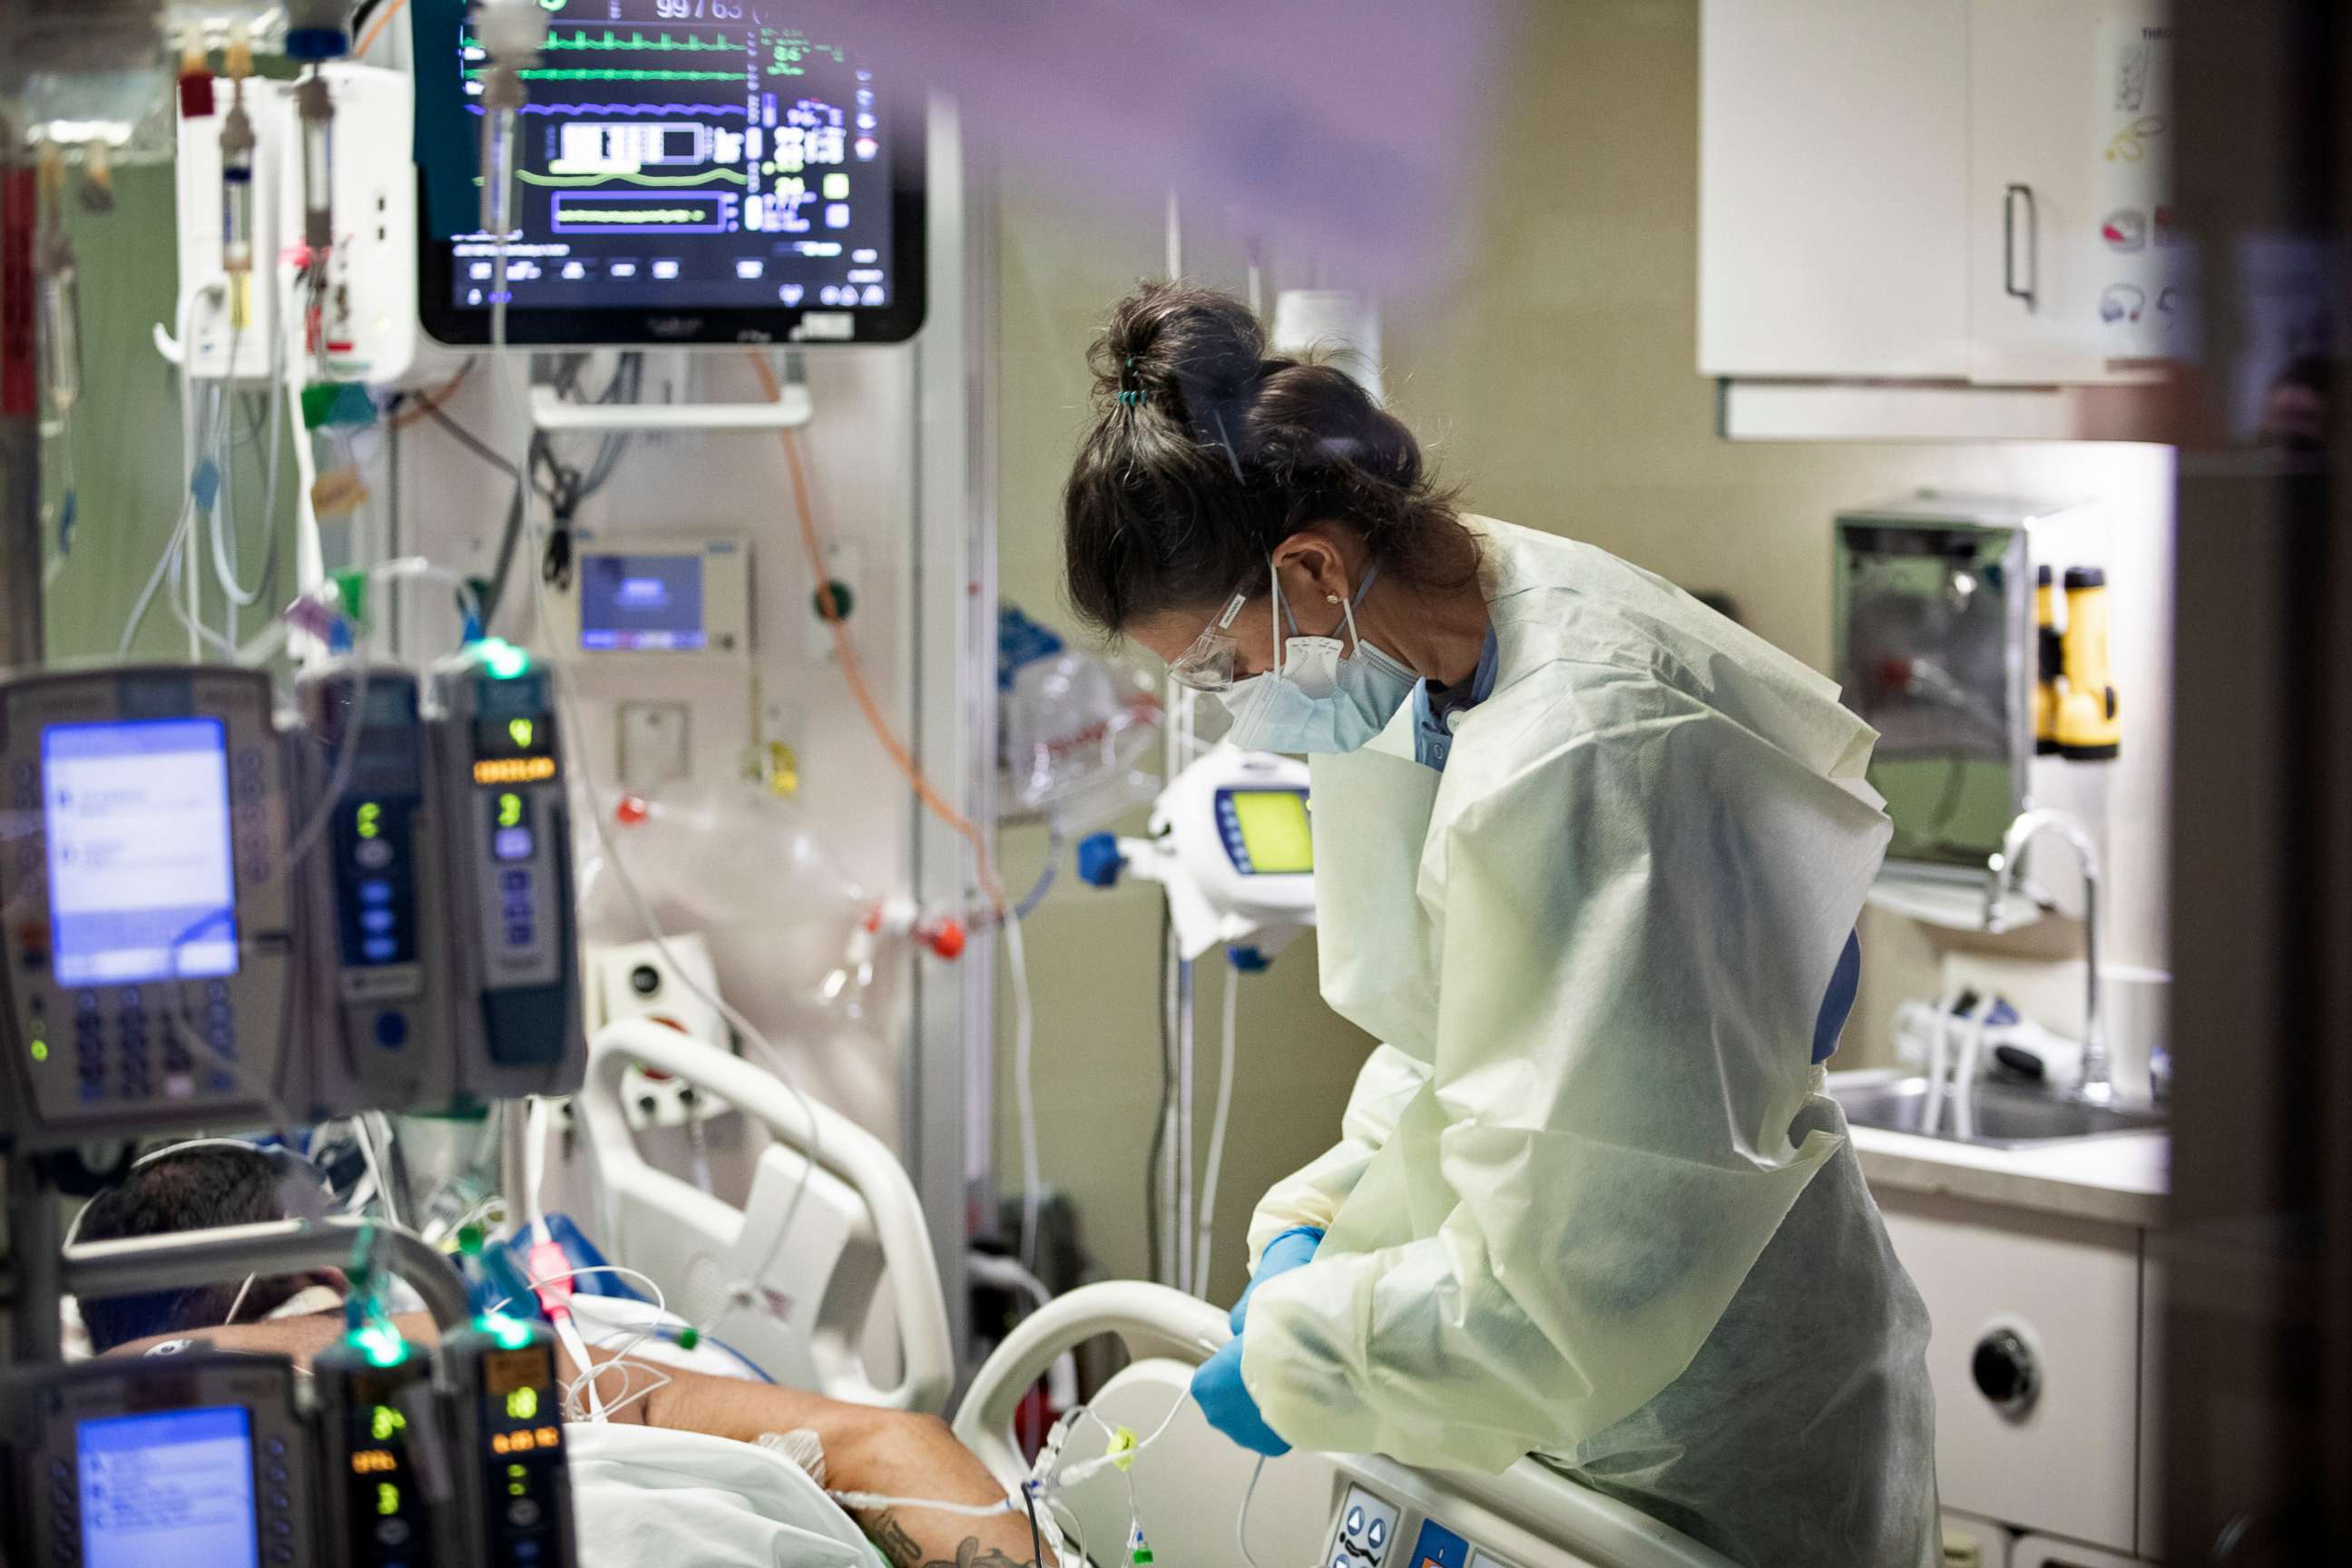 PHOTO: Registered nurse Ann Enderle checks on a COVID-19 patient in the Medical Intensive care unit at St. Luke's Boise Medical Center in Boise, Idaho on Aug. 31, 2021.